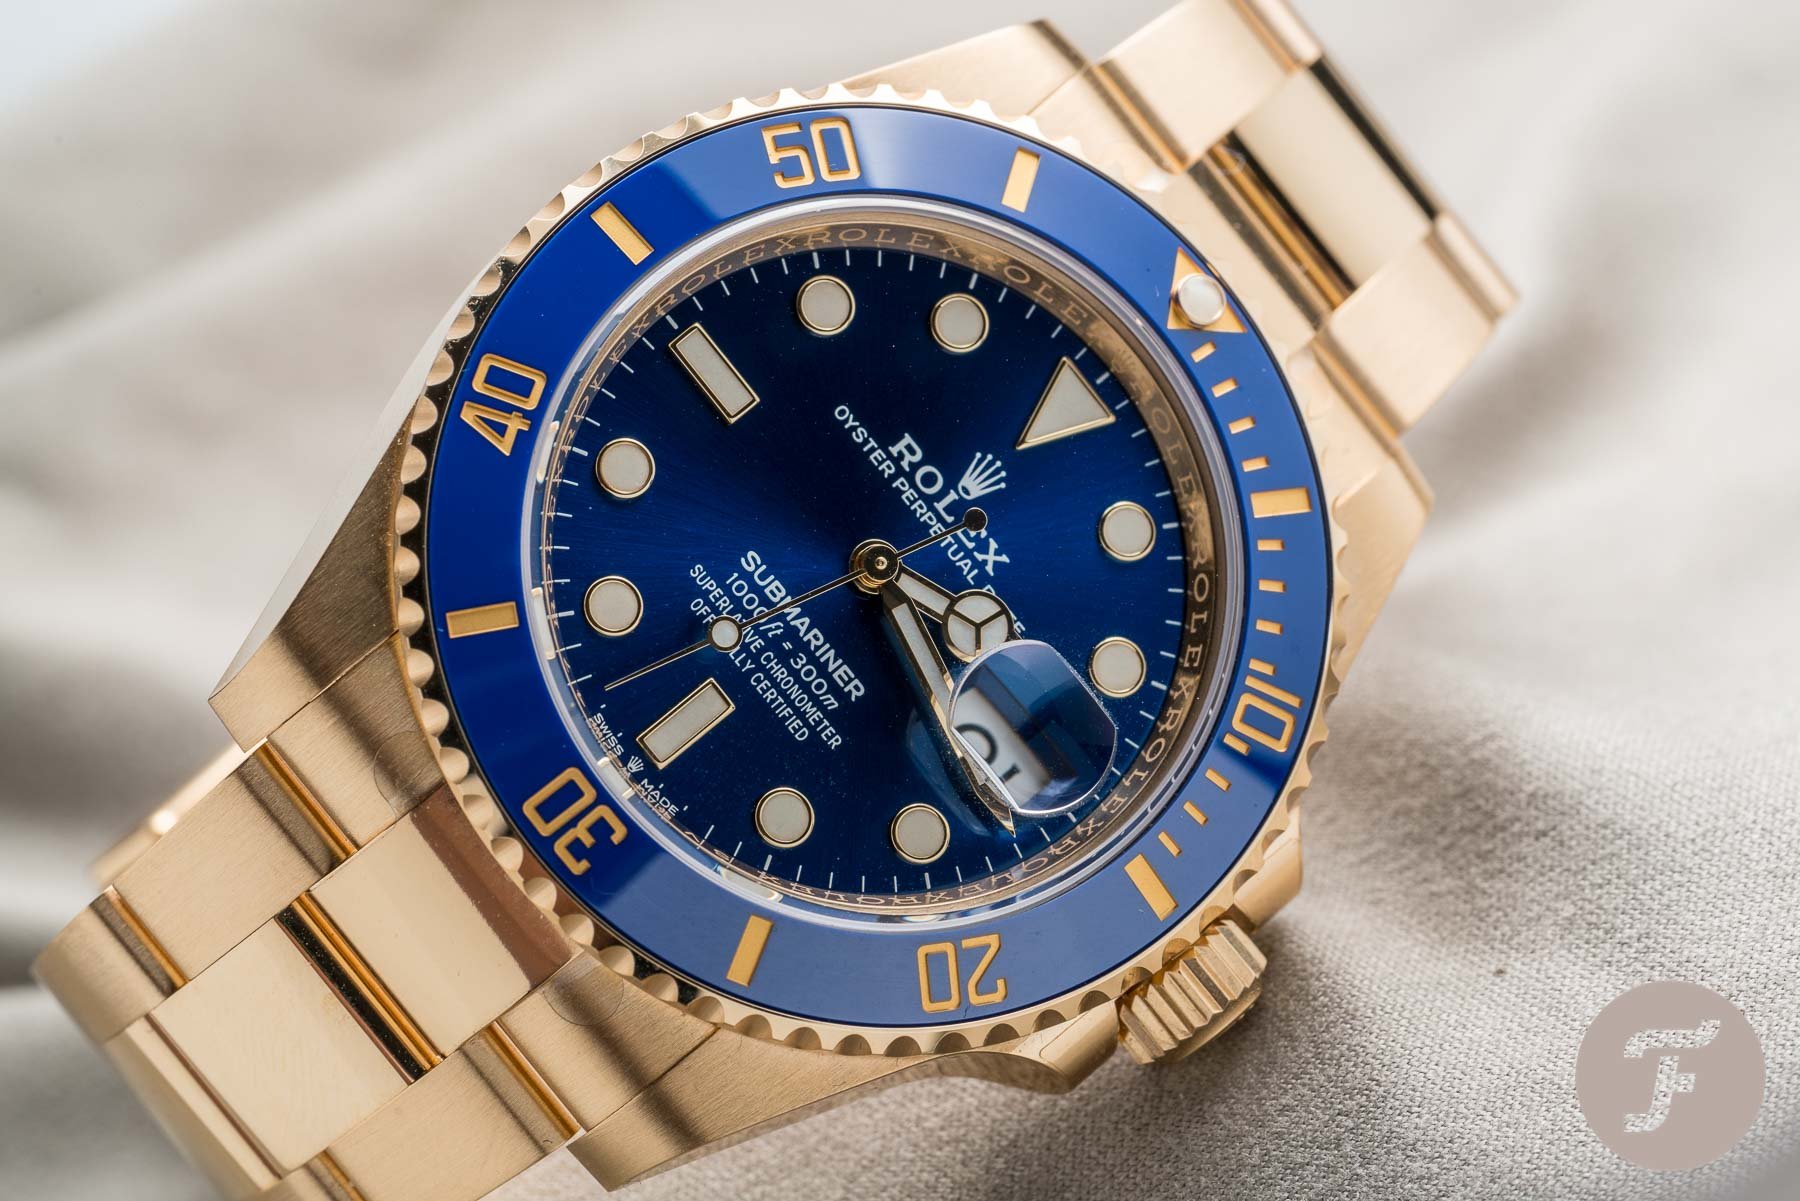 The New Rolex Submariner Date In Gold Reference 126618LB